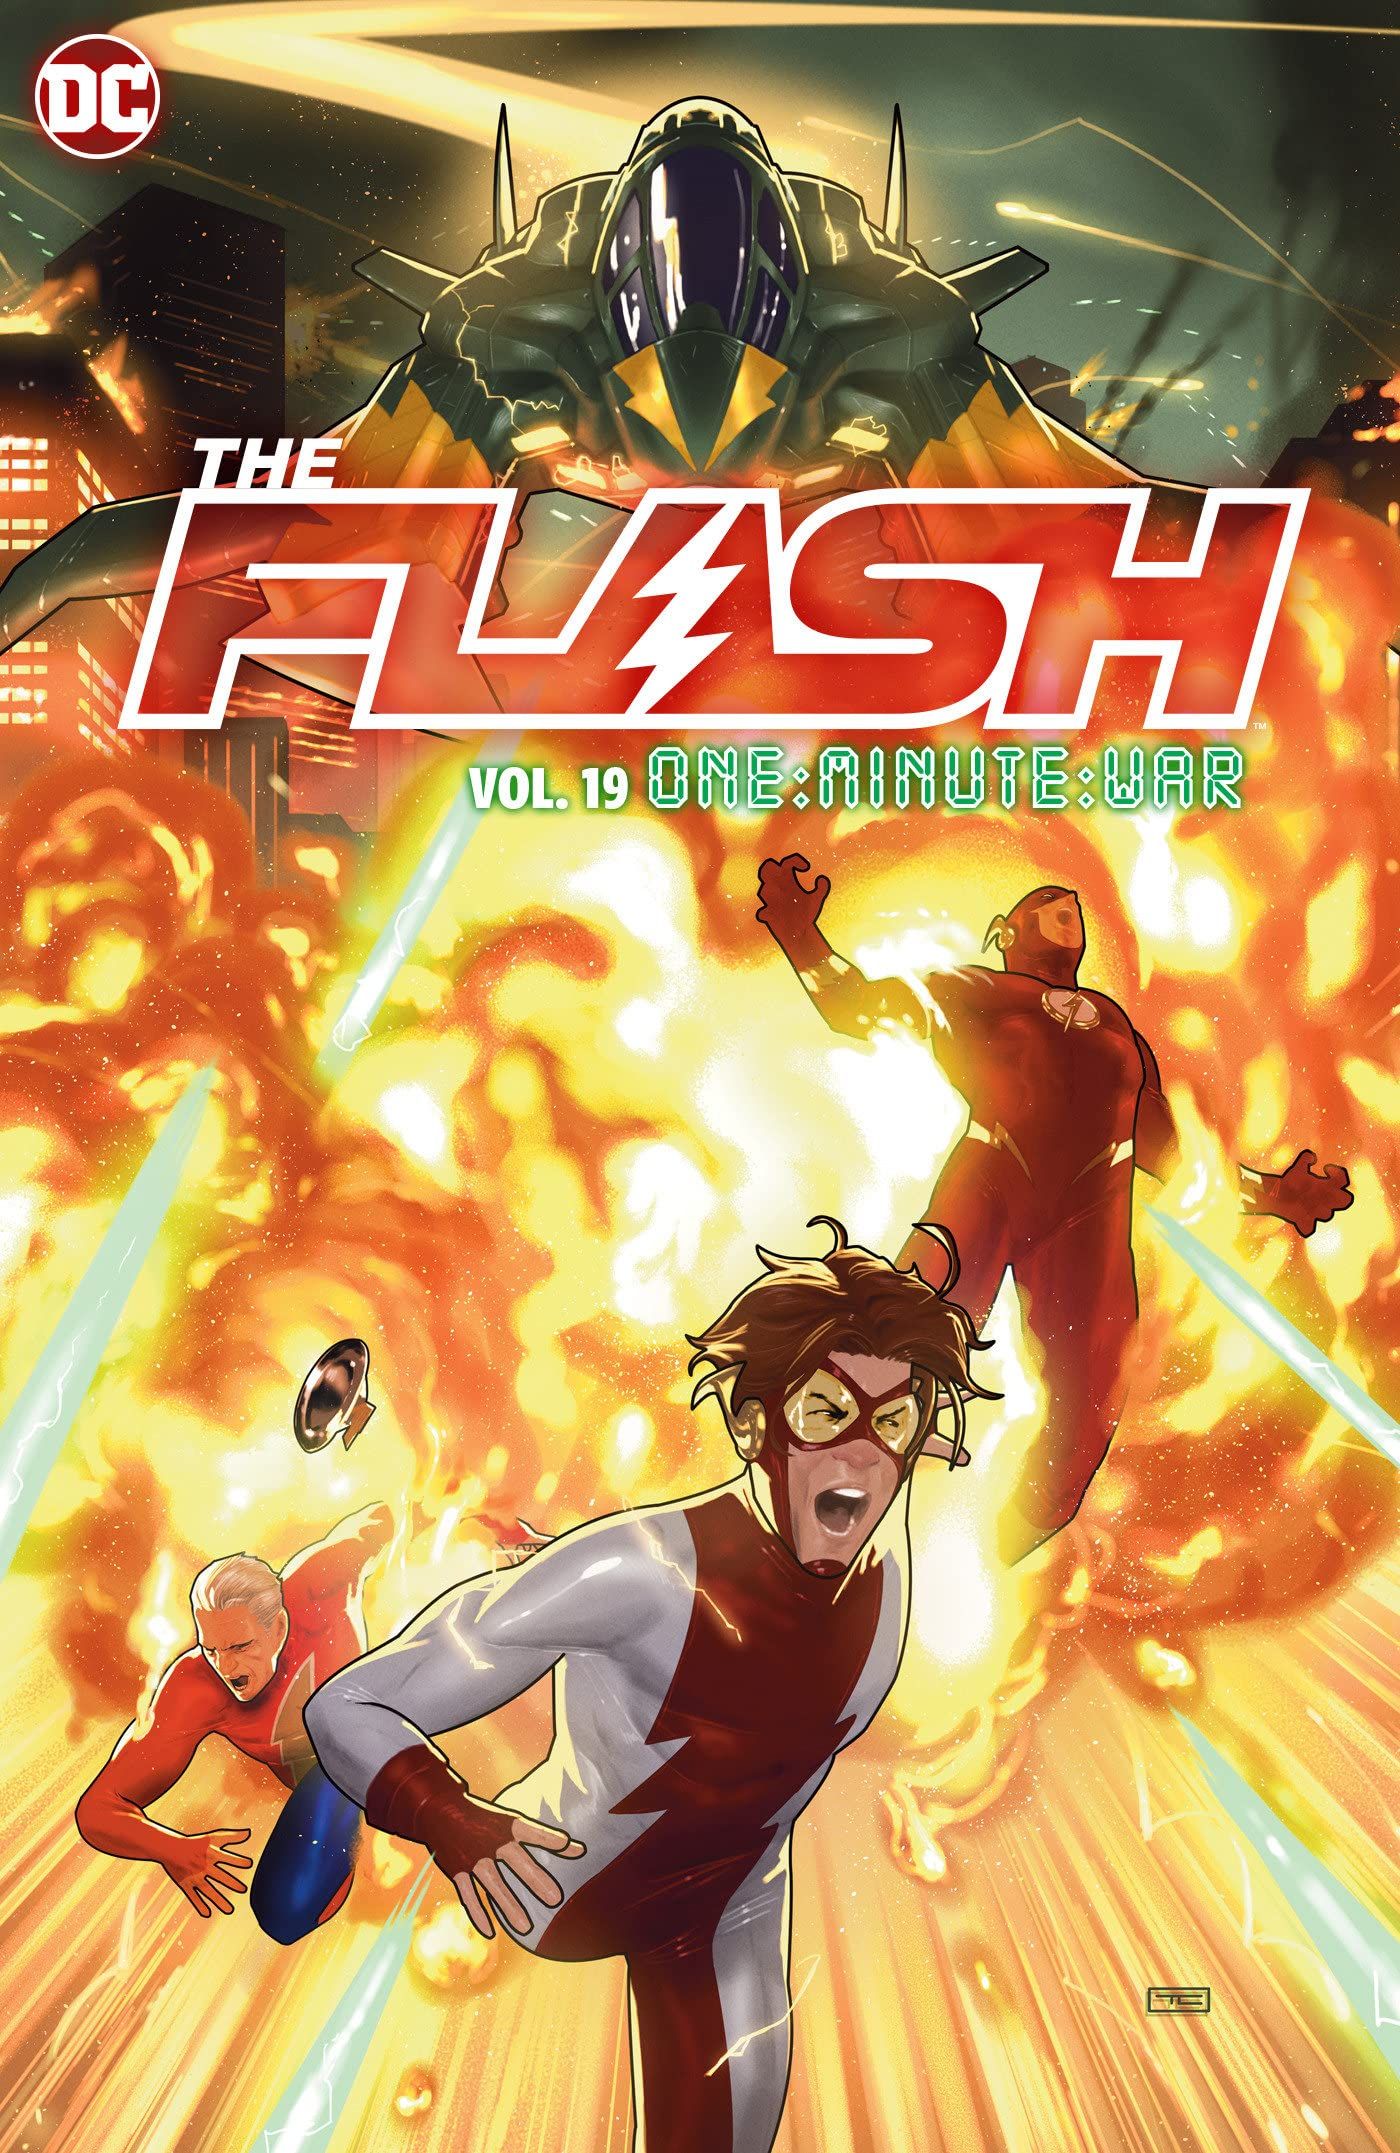 <p><strong>$19.99</strong></p><p>With the pre-New 52 reality restored, the DC Universe has what some may consider a problem: too many Flashes. Not only are Barry and Wally and Jay Garrick running around as The Flash, but there’s a new Kid Flash (Wallace West, to make things more confusing), a Chinese Flash called Avery Ho, Barry’s grandson from the future Impulse, and related speedster Jessie Quick. Rather than thin the herd, current Flash writer Jeremy Adams says “the more, the merrier” and puts them all to work in the storyline, “One Minute War.” When a group of super-speed aliens arrive to cultivate Earth, it’s up to all the world’s Flashes to stop them, resulting in an epic battle that takes only sixty seconds. </p><p>With art from Roger Cruz, Wellington Diaz, Luis Guerrero, and Taurin Clarke, “One Minute War” is Flash storytelling at its best. It takes full advantage of not only the central conceit of Flash stories—this guy can run really, really fast—but also of the seemingly crowded roster of heroes. Leaning into the over-the-top fun of super-speedy good guys and bad guys, “One Minute War” proves you can never have too many Flashes.</p>